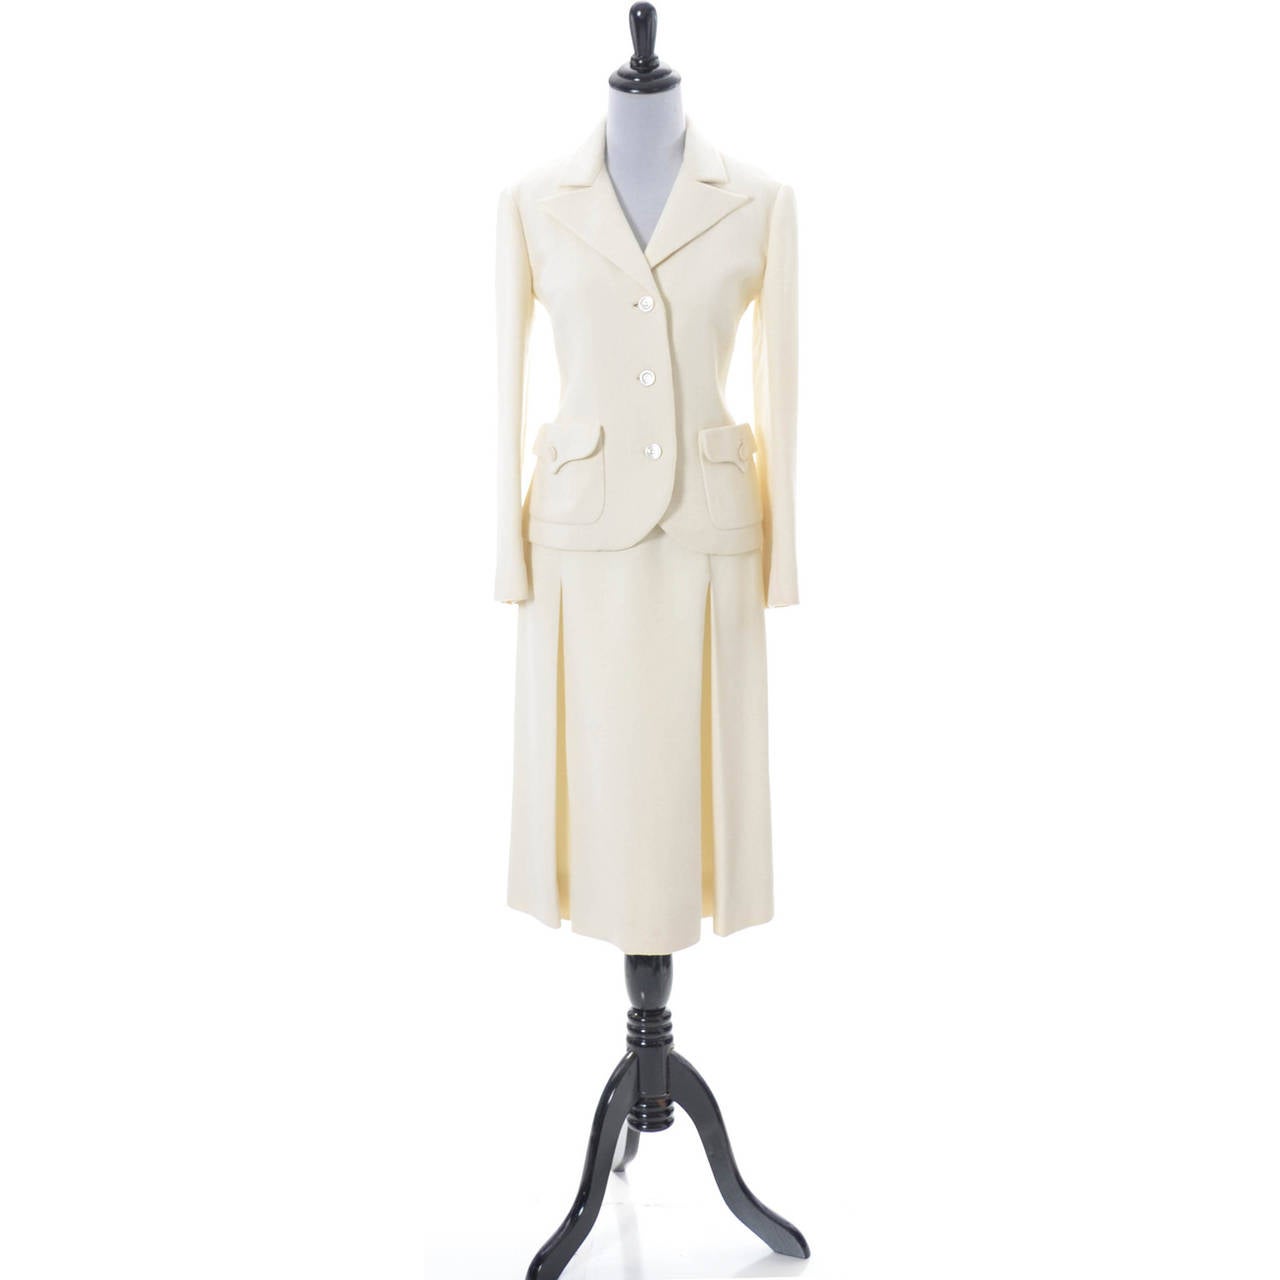 This vintage skirt suit is from Valentino and bears the early Boutique Valentino New York/Rome Made in Italy Brown and White label. I believe this suit is from 1969 or 1970.  The suit is made in a winter white medium to heavier weight wool crepe and